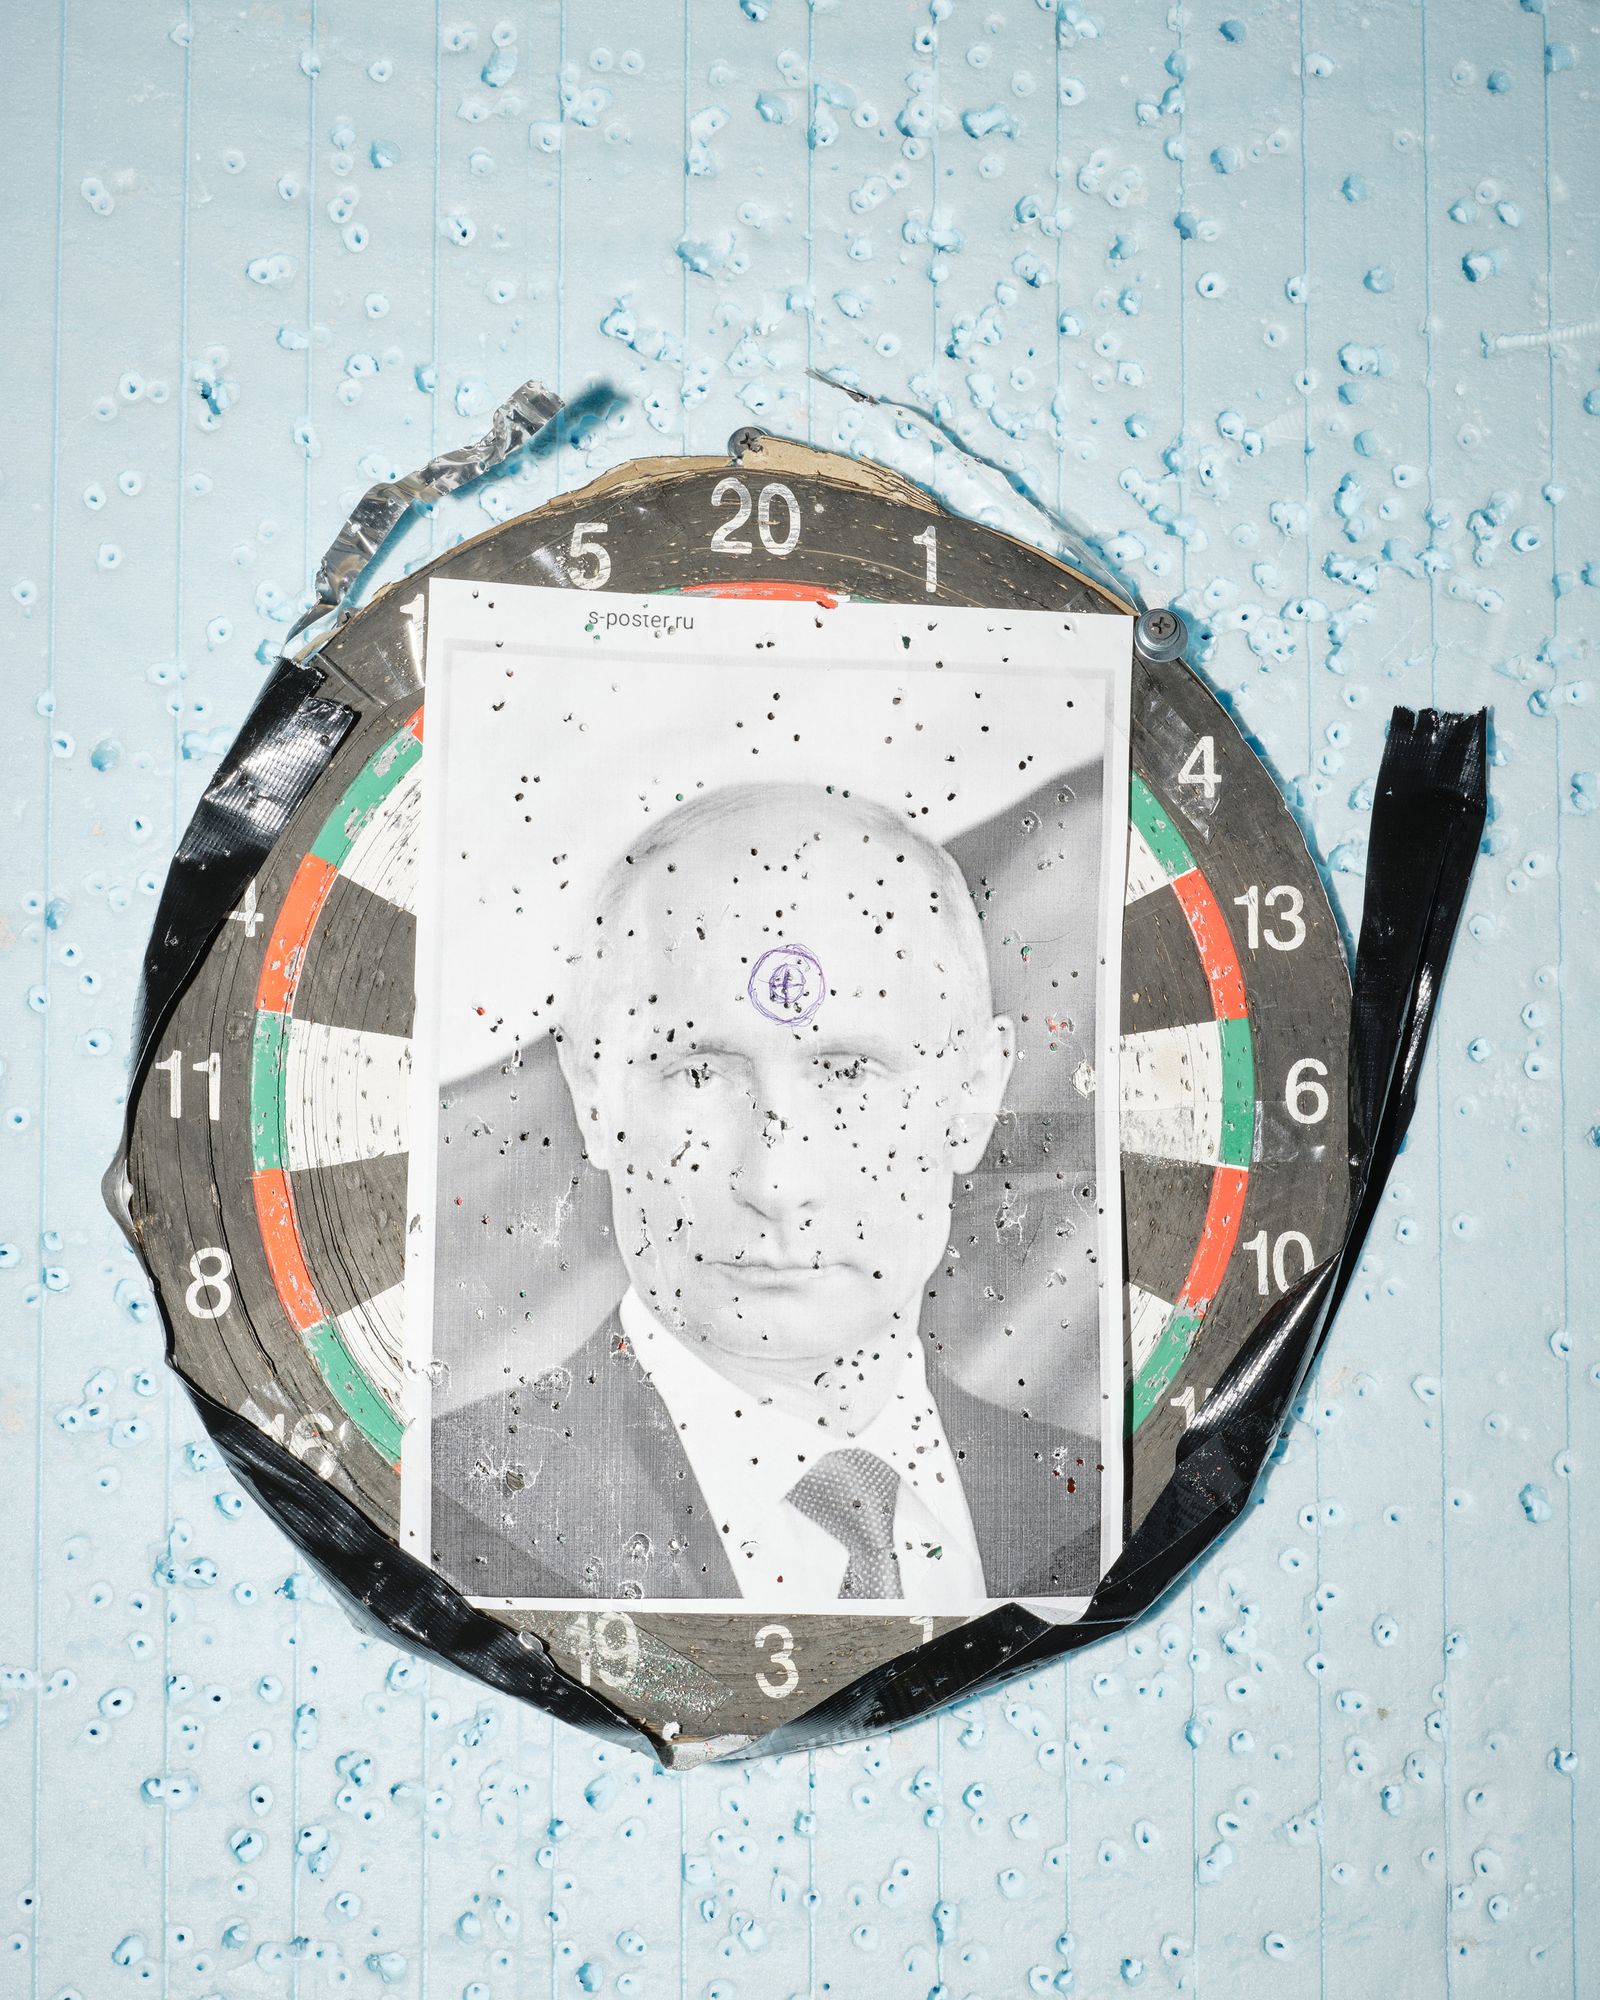 © Marcin Kruk - Lviv, 21/03/2022, A riddled photo of Putin, attached to a dart shield in one of the temporary refugee shelters in Lviv.